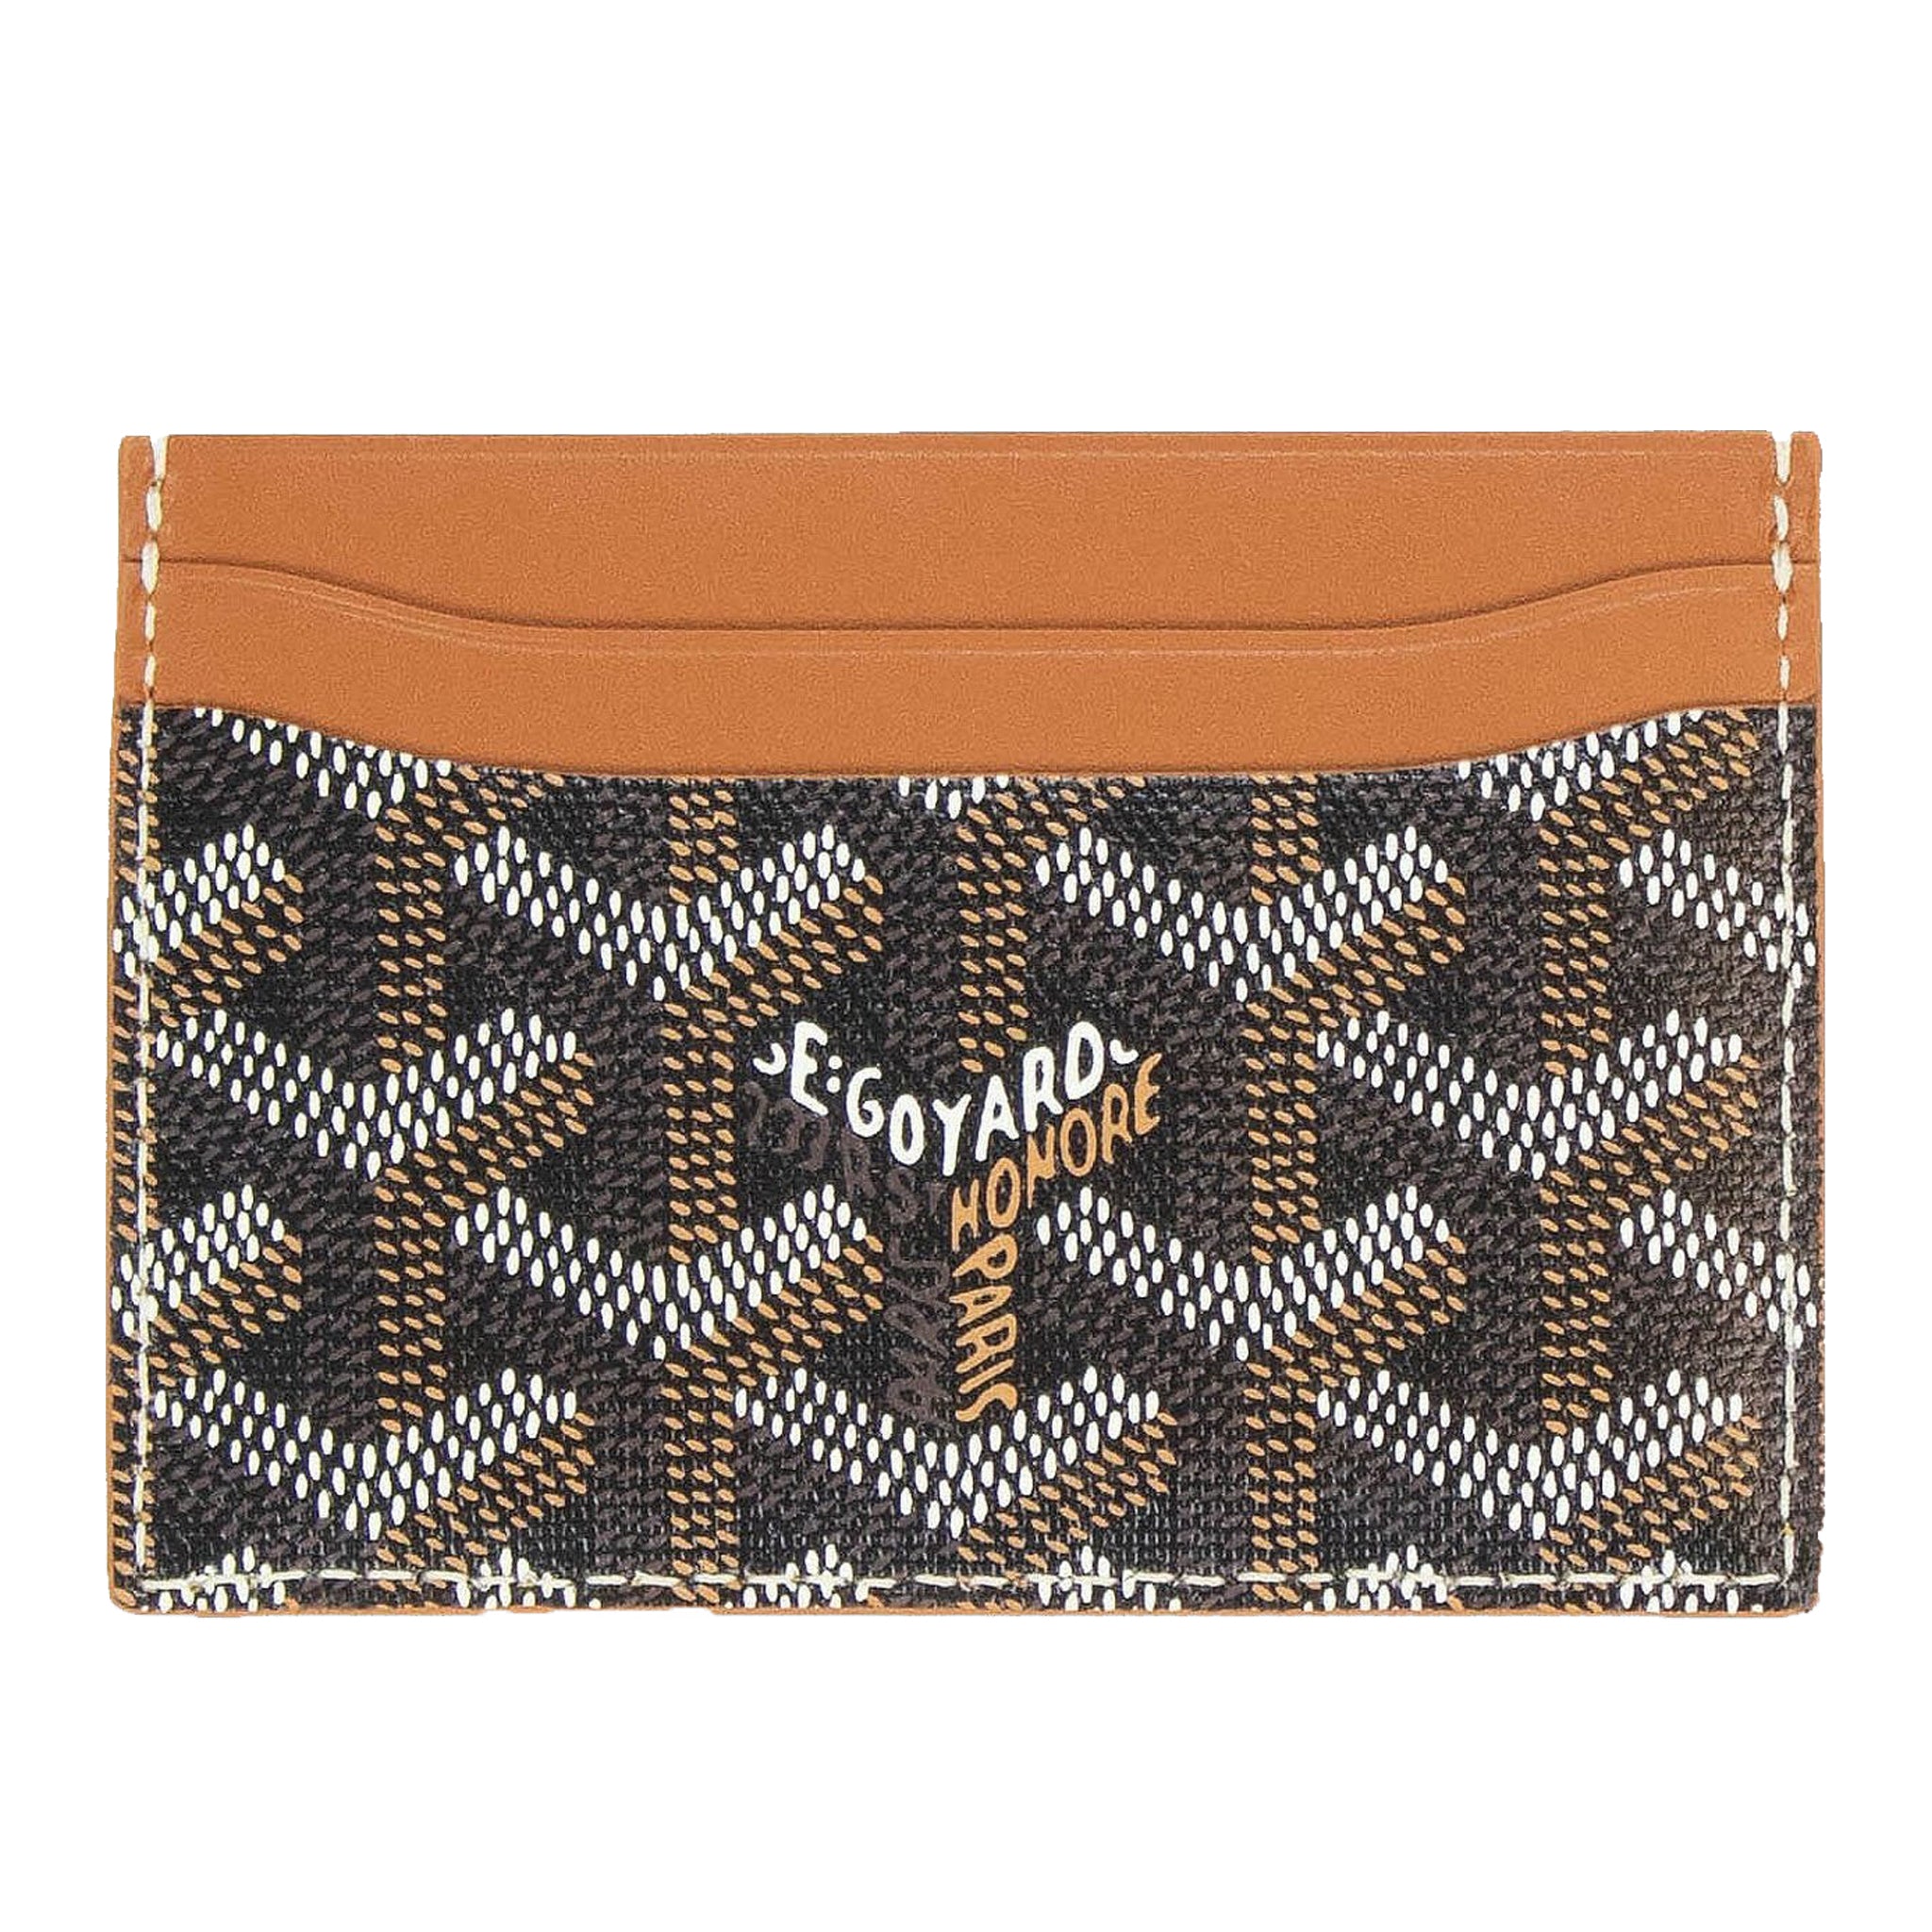 Step 1: Inspect the Y pattern on the Goyard Saint Sulpice card